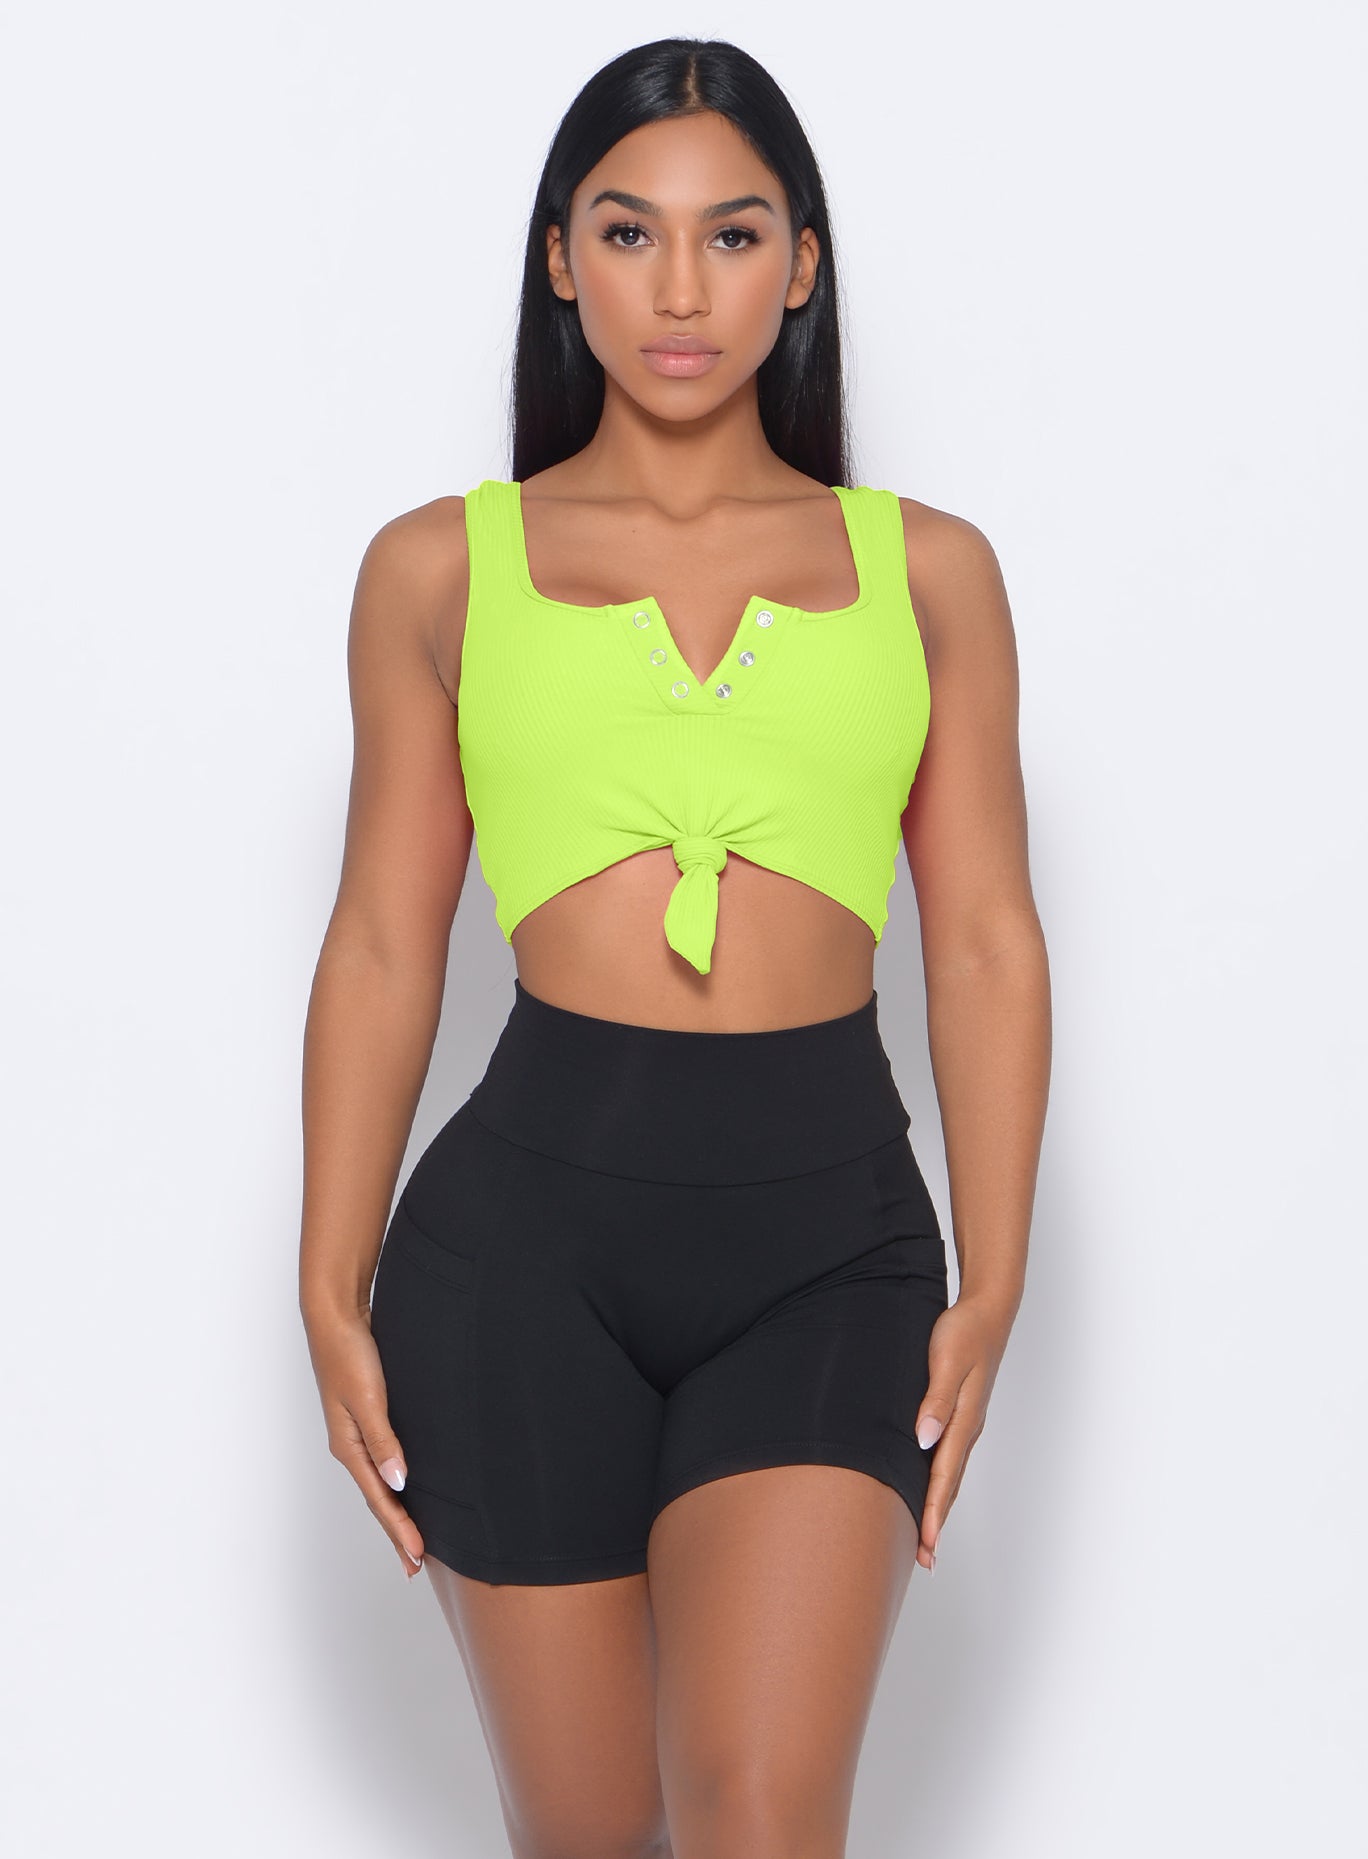 Front profile view of the model in our henley sports bra in neon yellow and a black shorts 